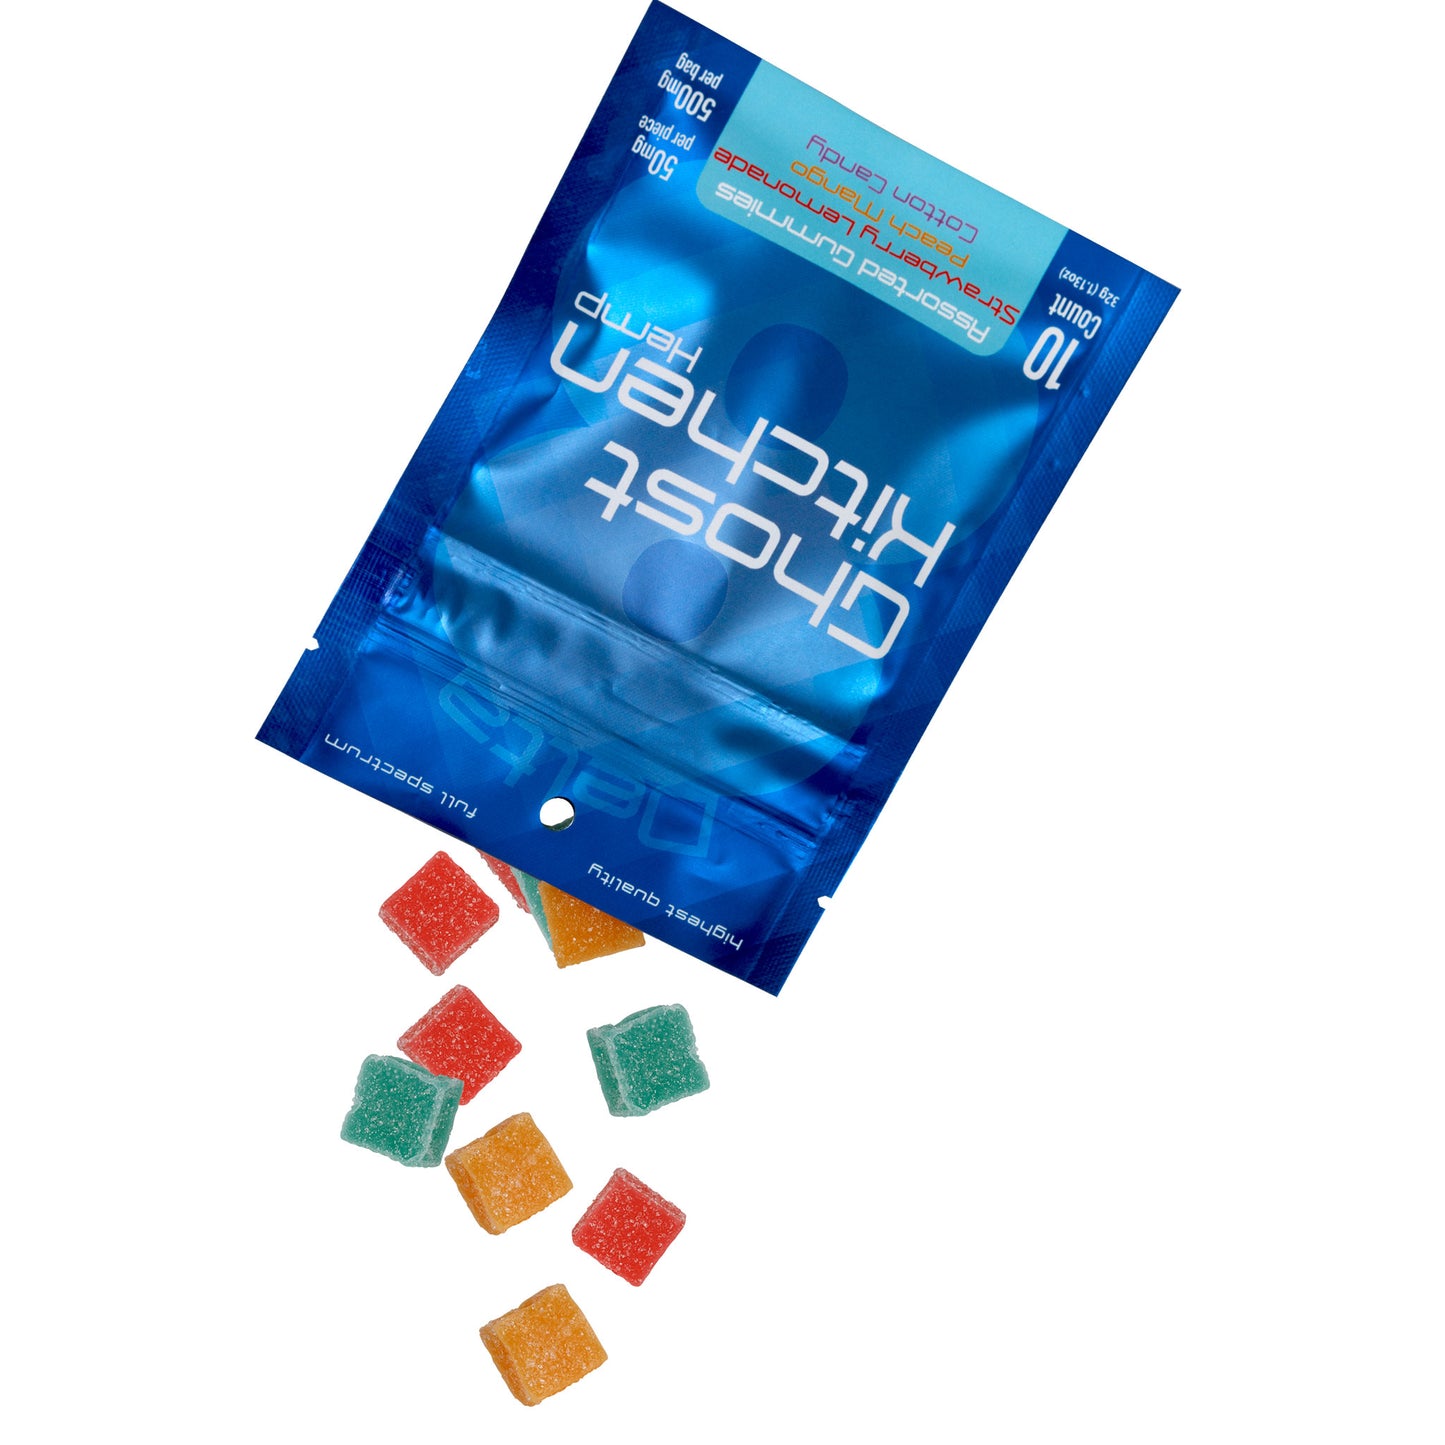 50mg Delta 8 Gummies(10 pack) ASSORTED FLAVORS